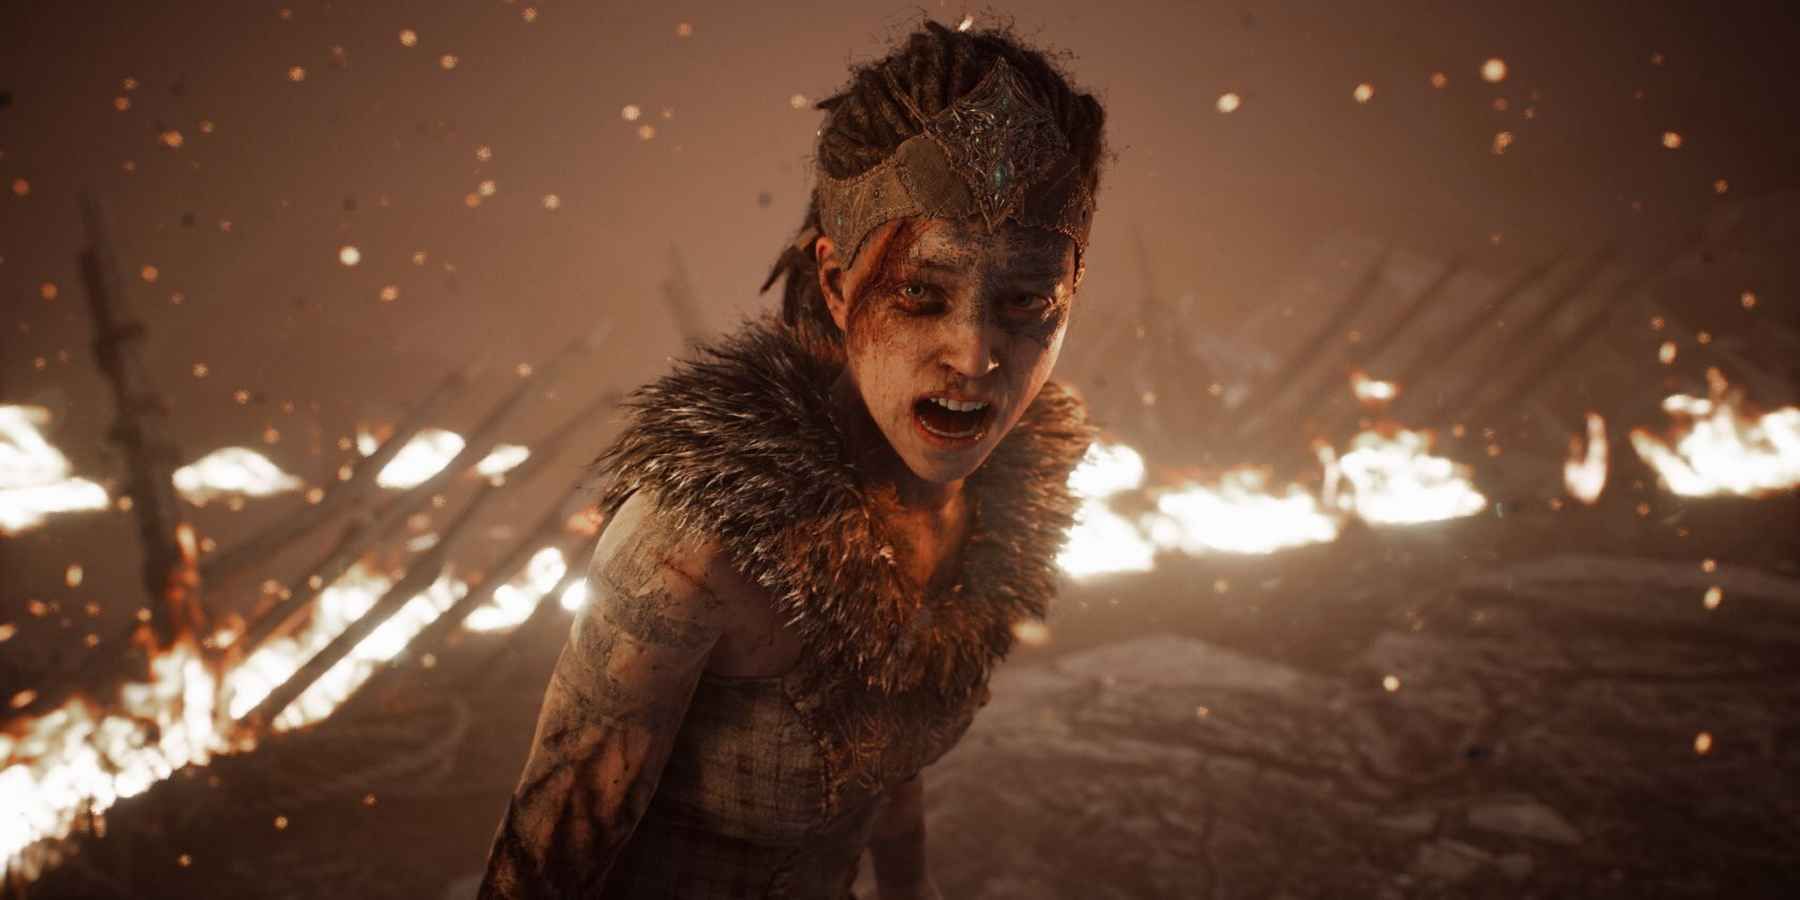 HELLBLADE 2 8 Minutes of Every Gameplay So Far (4K 60FPS 2022) 